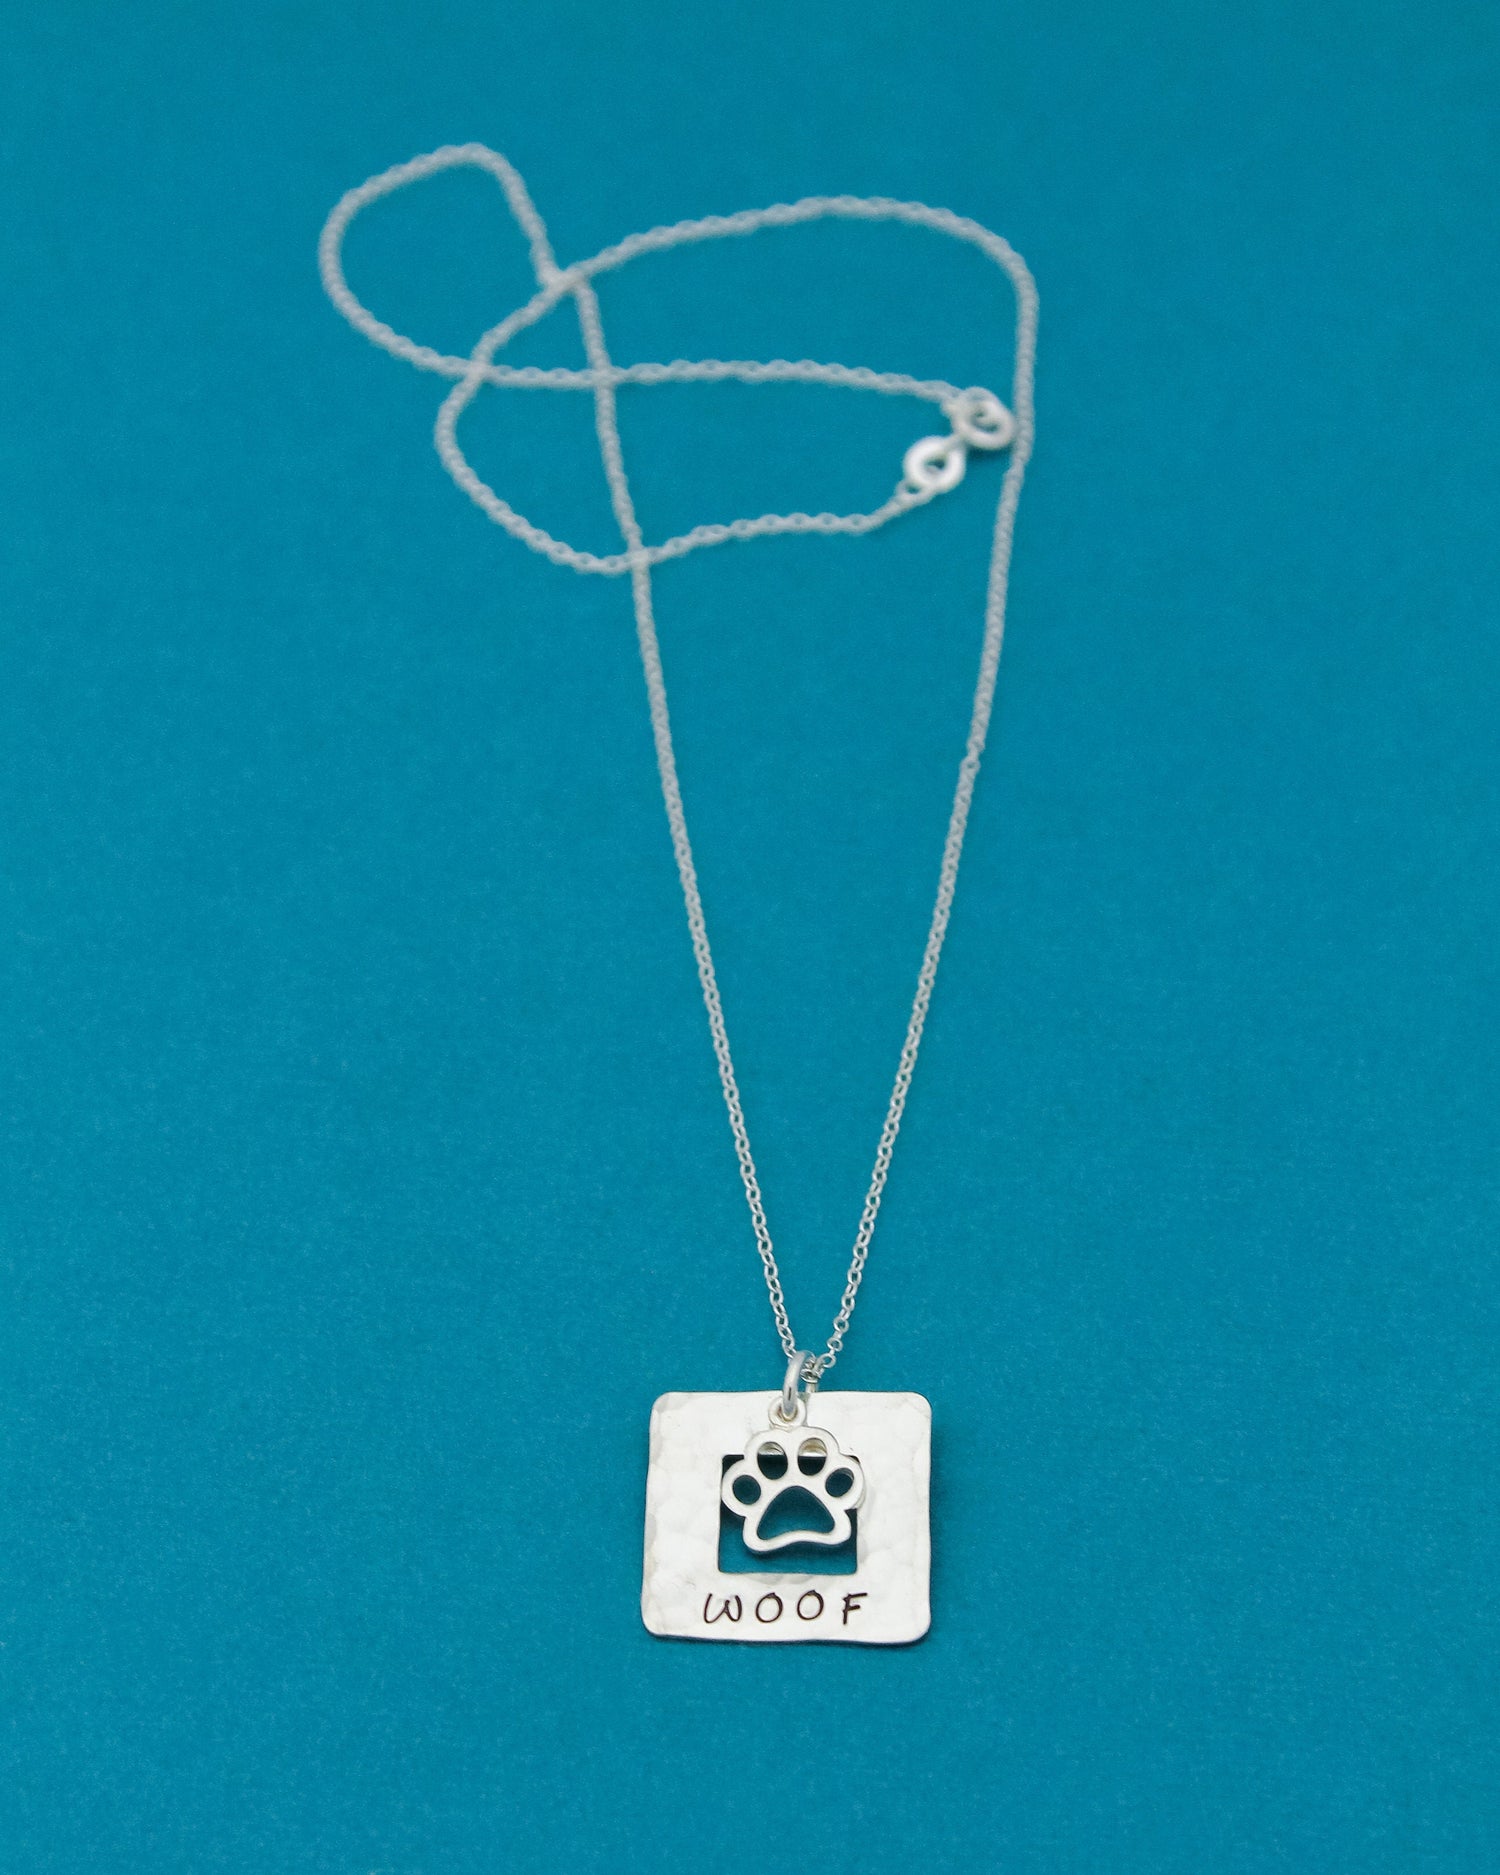 WOOF Necklace, Sterling Silver Dog Paw Necklace, Dog Lover Gift, New Pet Gift, Dog Paw Jewelry, Paw Print Necklace, Hand Stamped Jewelry